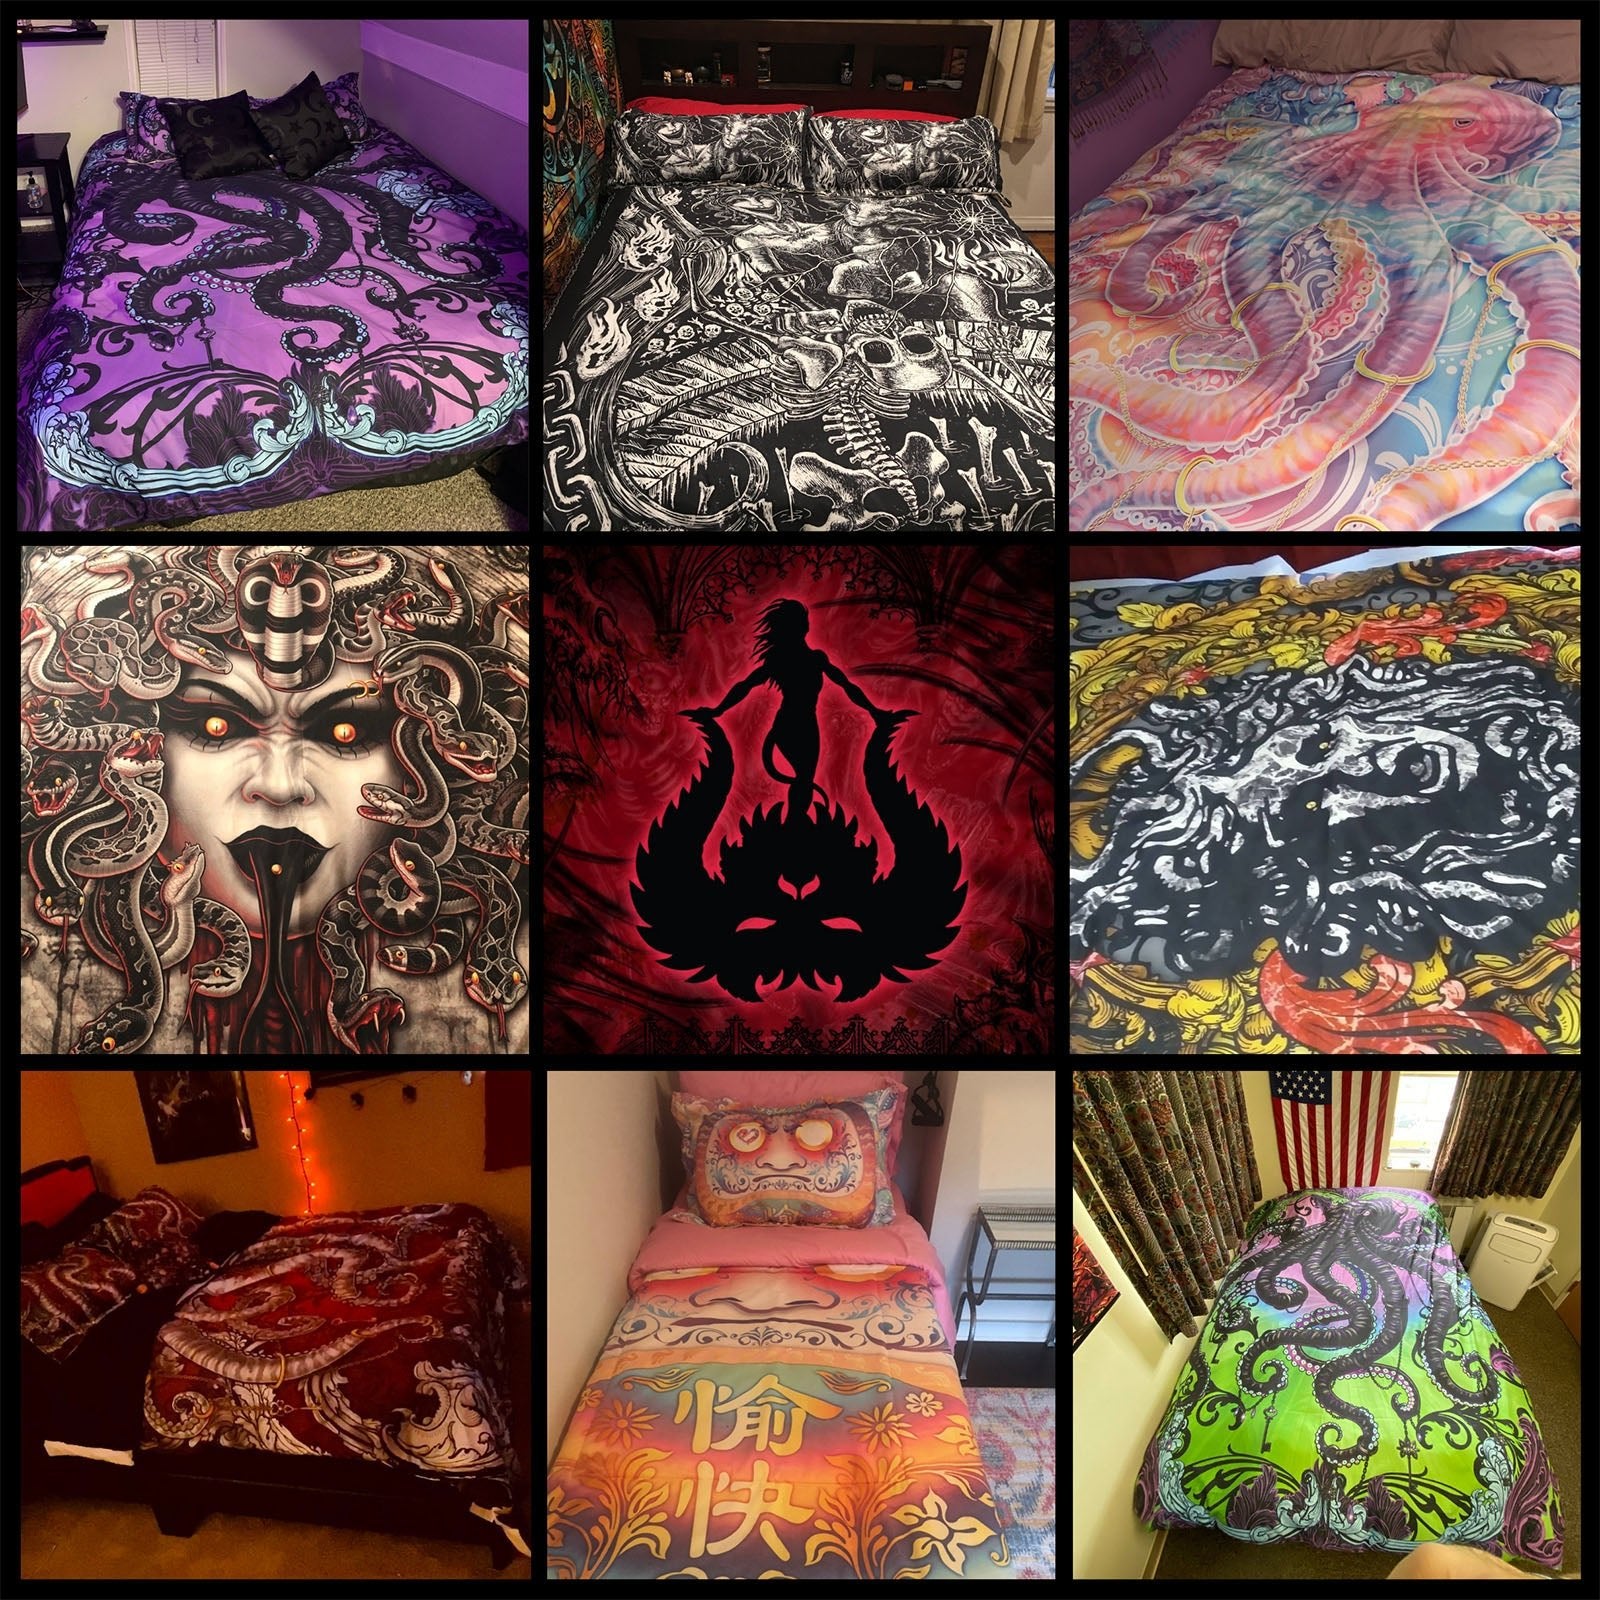 Lilith Bedding Set, Comforter and Duvet, Satanic Demon Art, Alternative Bed Cover and Bedroom Decor, King, Queen and Twin Size - Clothed - Abysm Internal